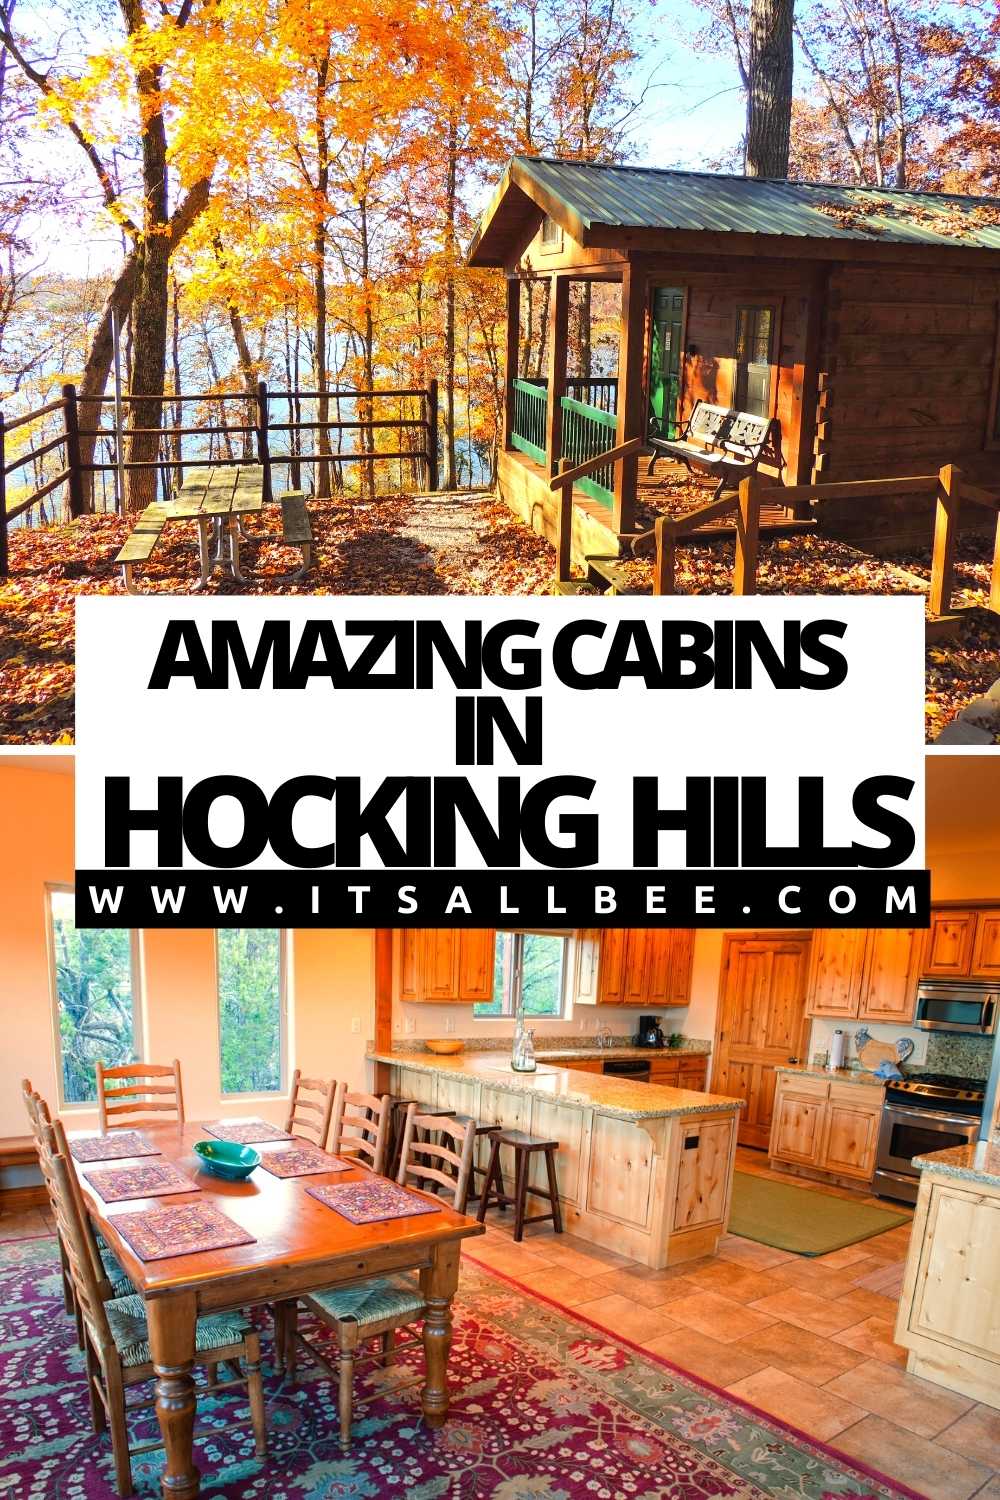  | Old Man’s Cave Cabins | Hocking Hills State Park Cabins | Cheap Hocking Hills Cabin Rentals | Hocking Hills Romantic Cabins For 2 | Hocking Hills Chalets | 